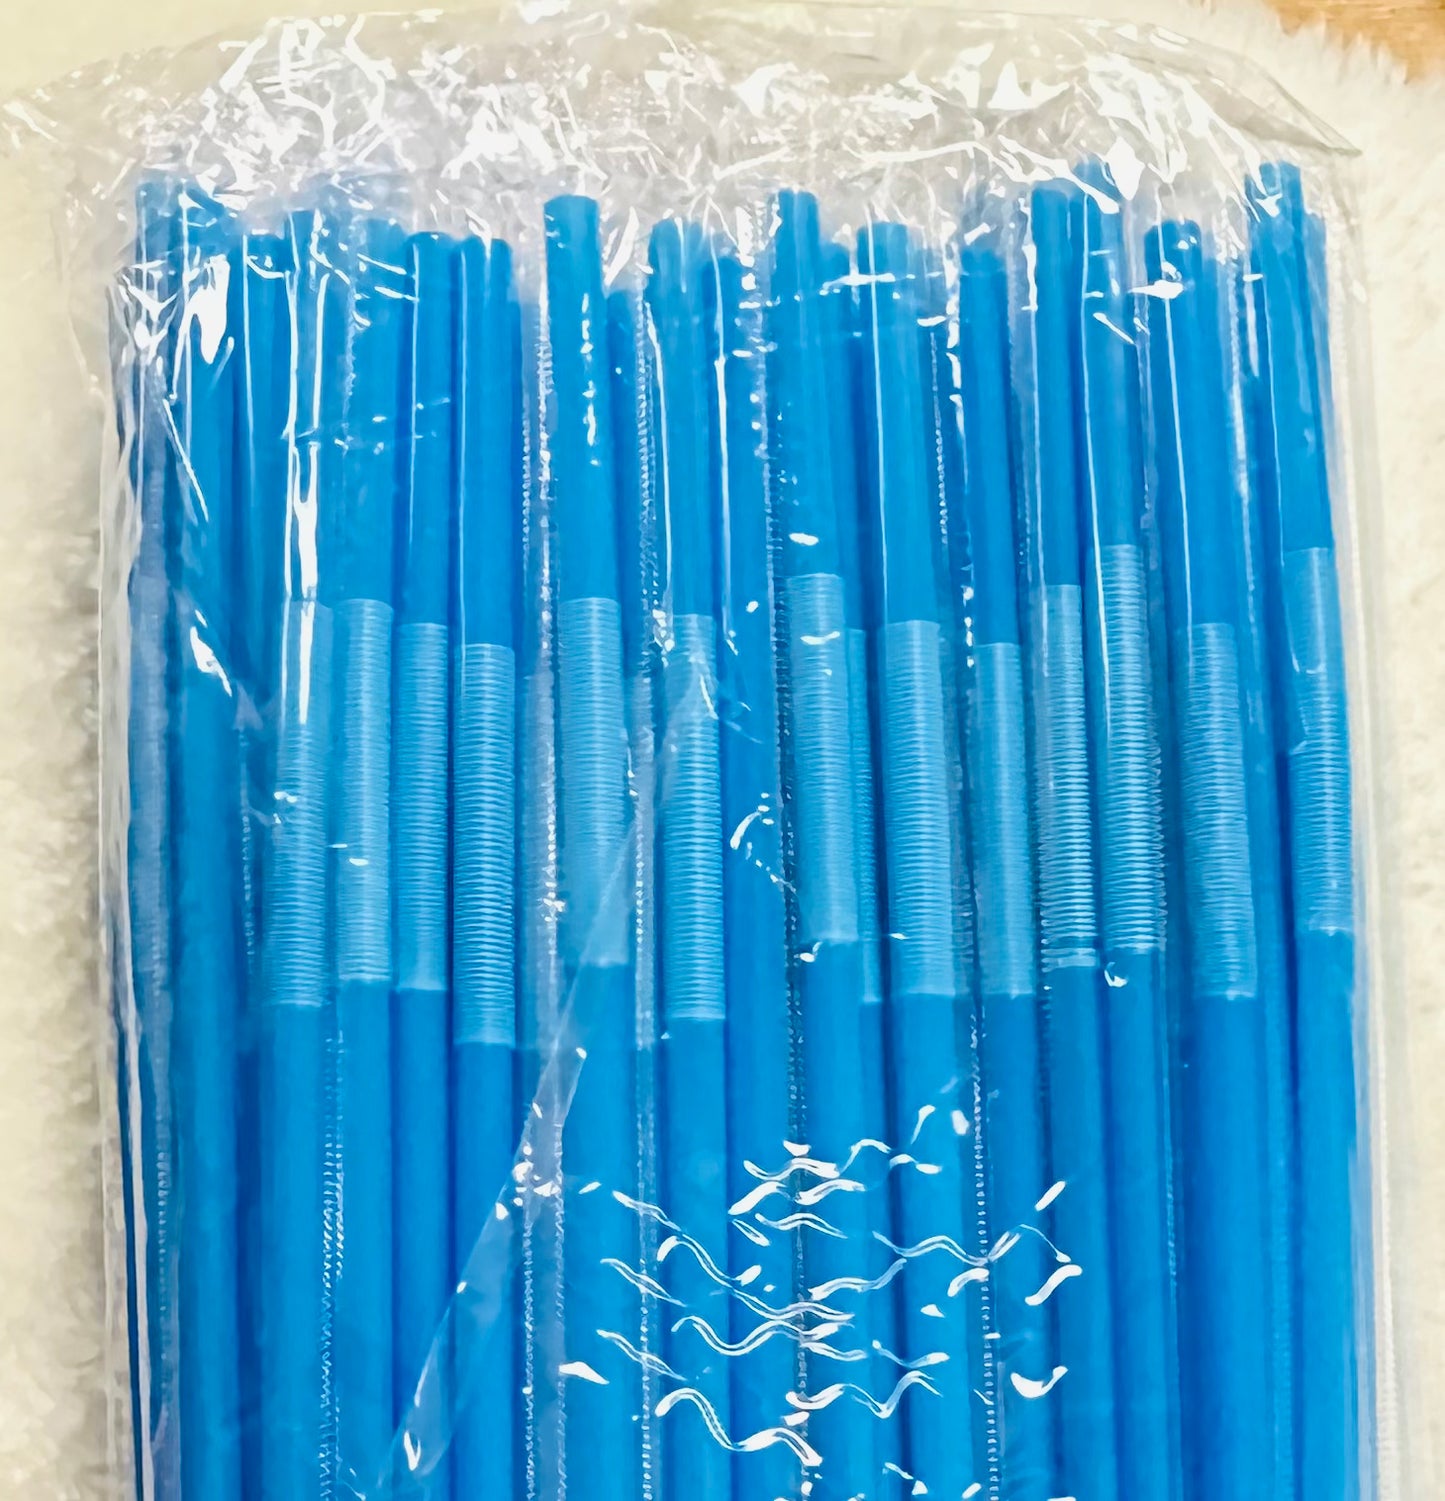 Reusable Drinks Pouch with Straw 10pk